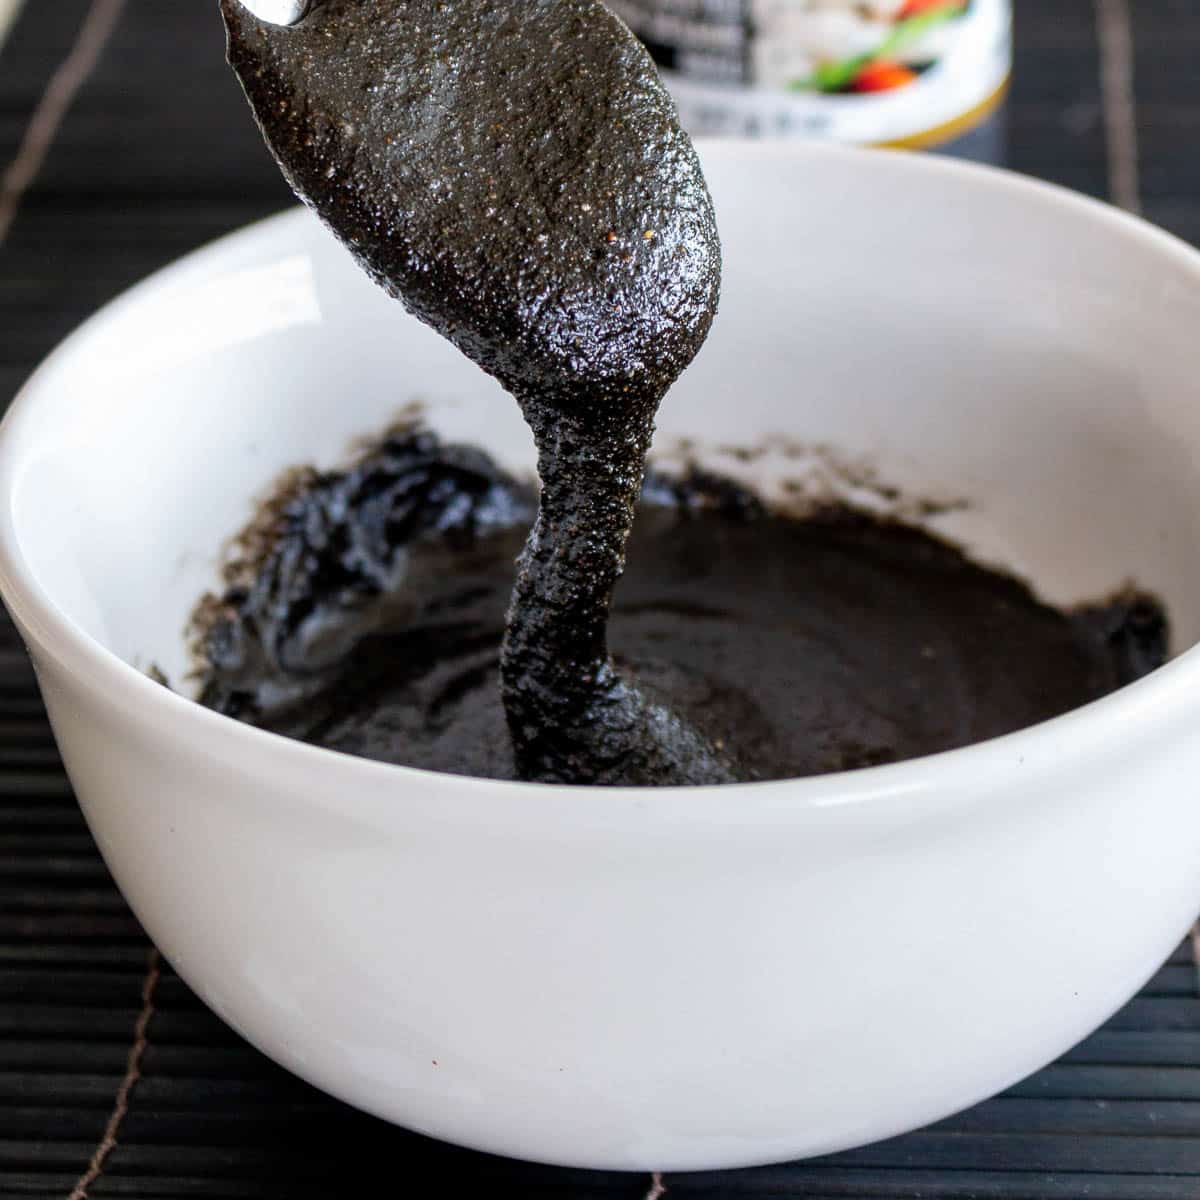 Thick homemade black sesame paste slowly flowing from a spoon onto a white bowl.